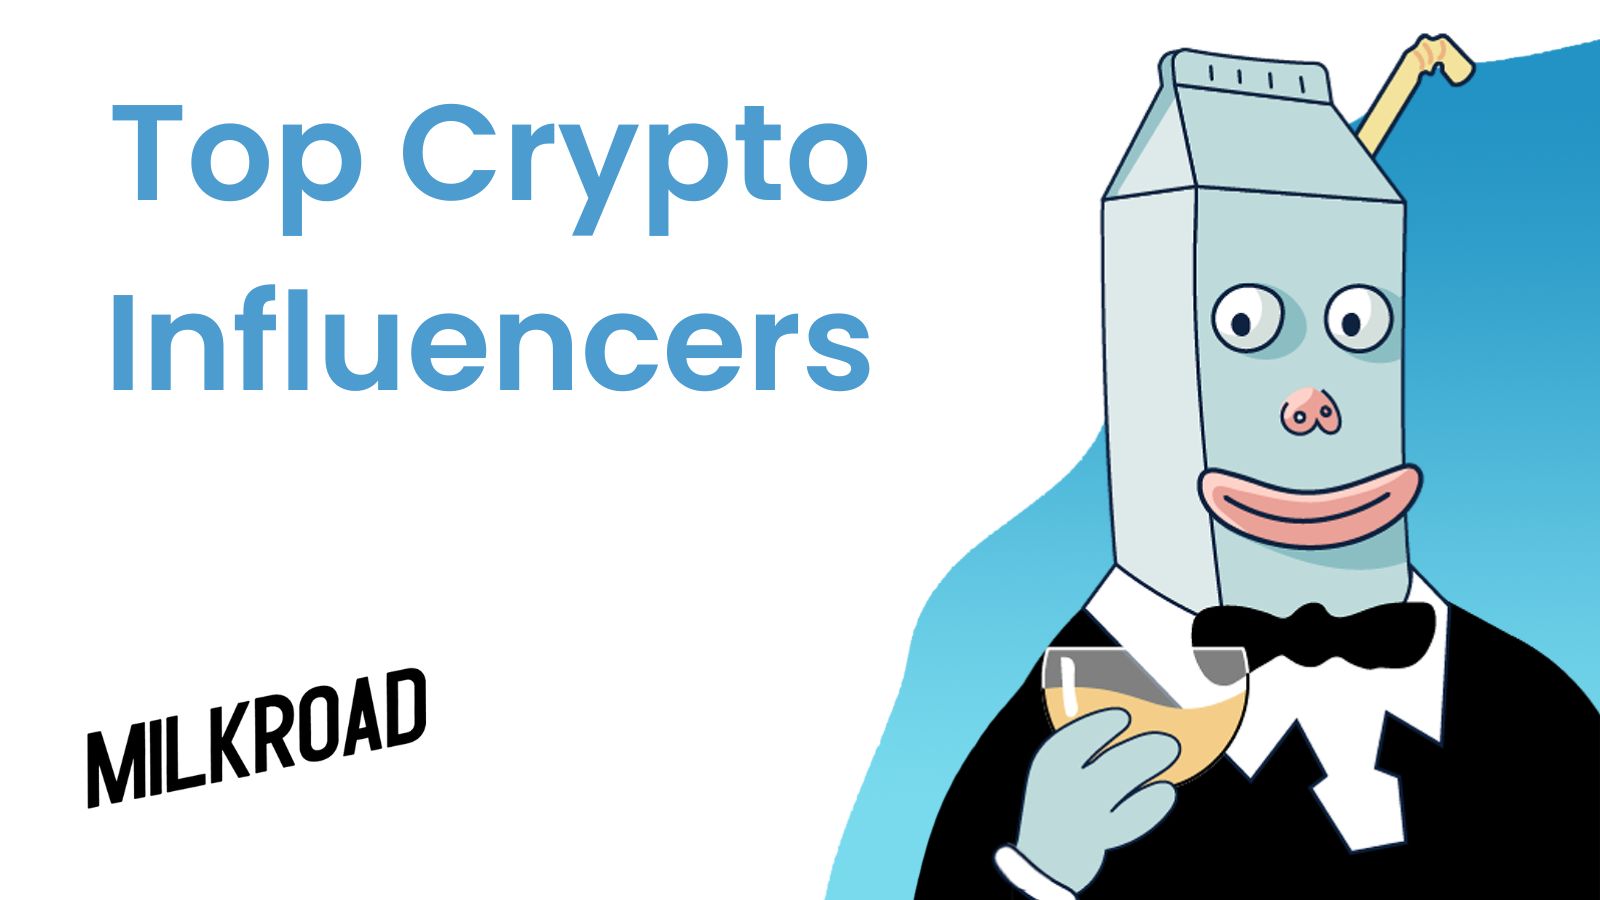 Top Crypto Influencers: Founders, Personalities, Politicians, & More